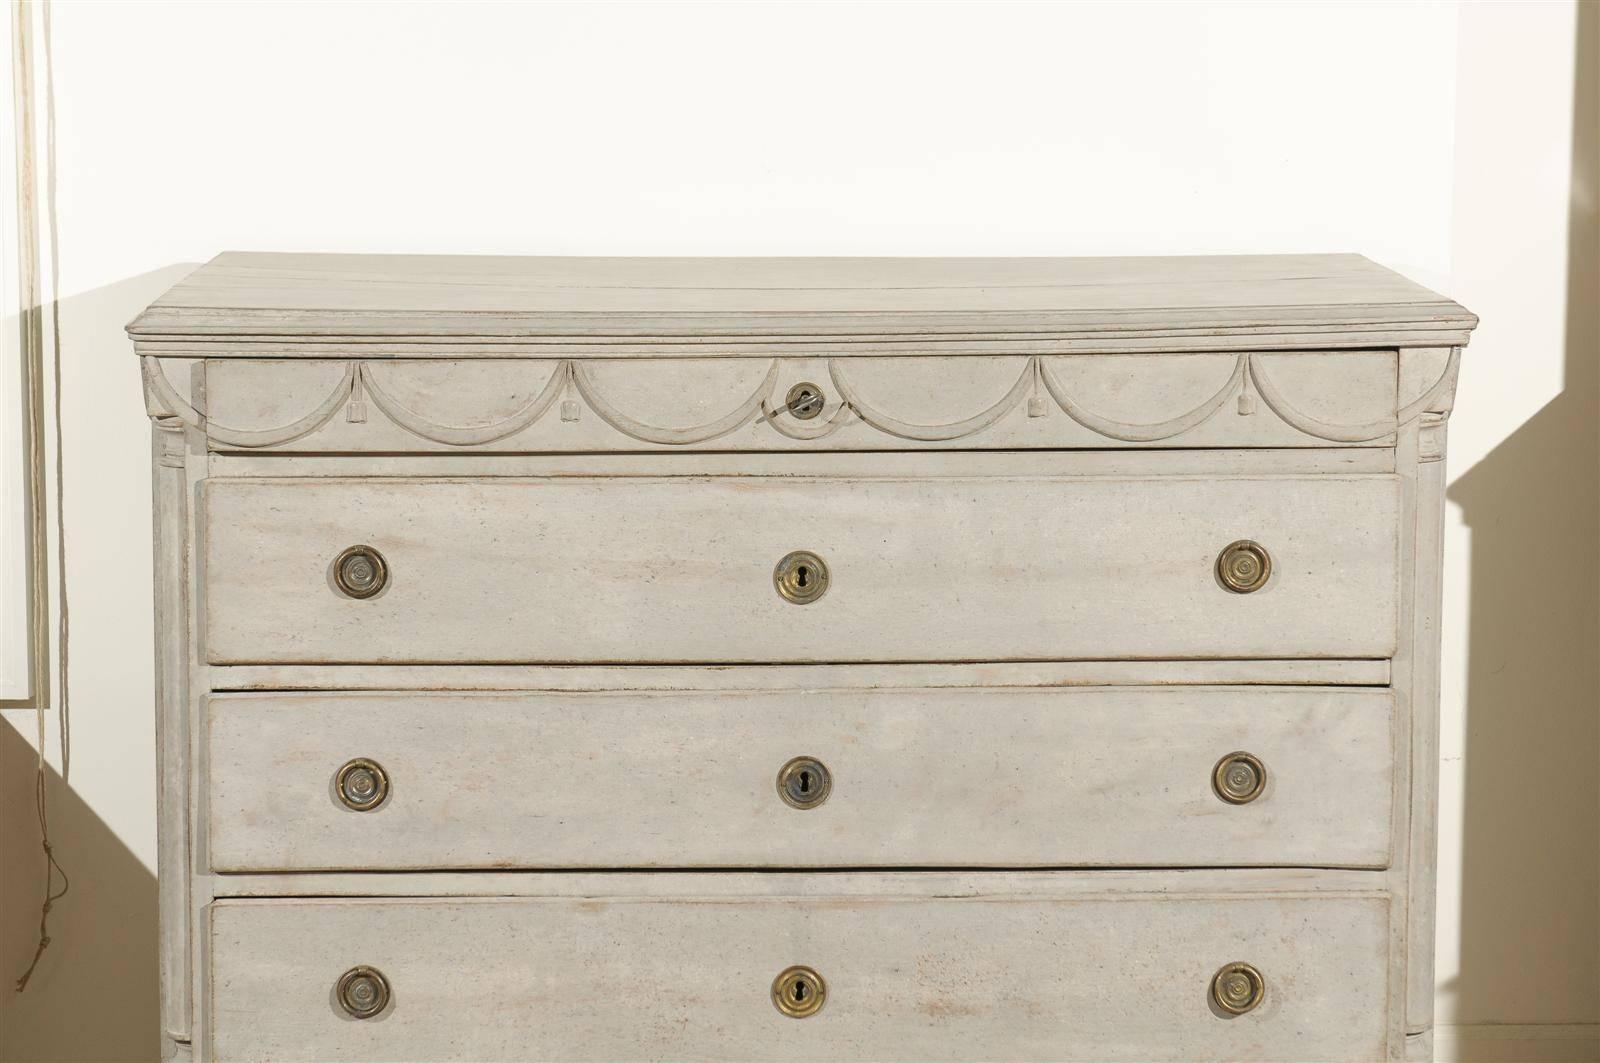 19th Century Swedish 1820s Neoclassical Painted Five-Drawer Commode with Carved Swag Motifs